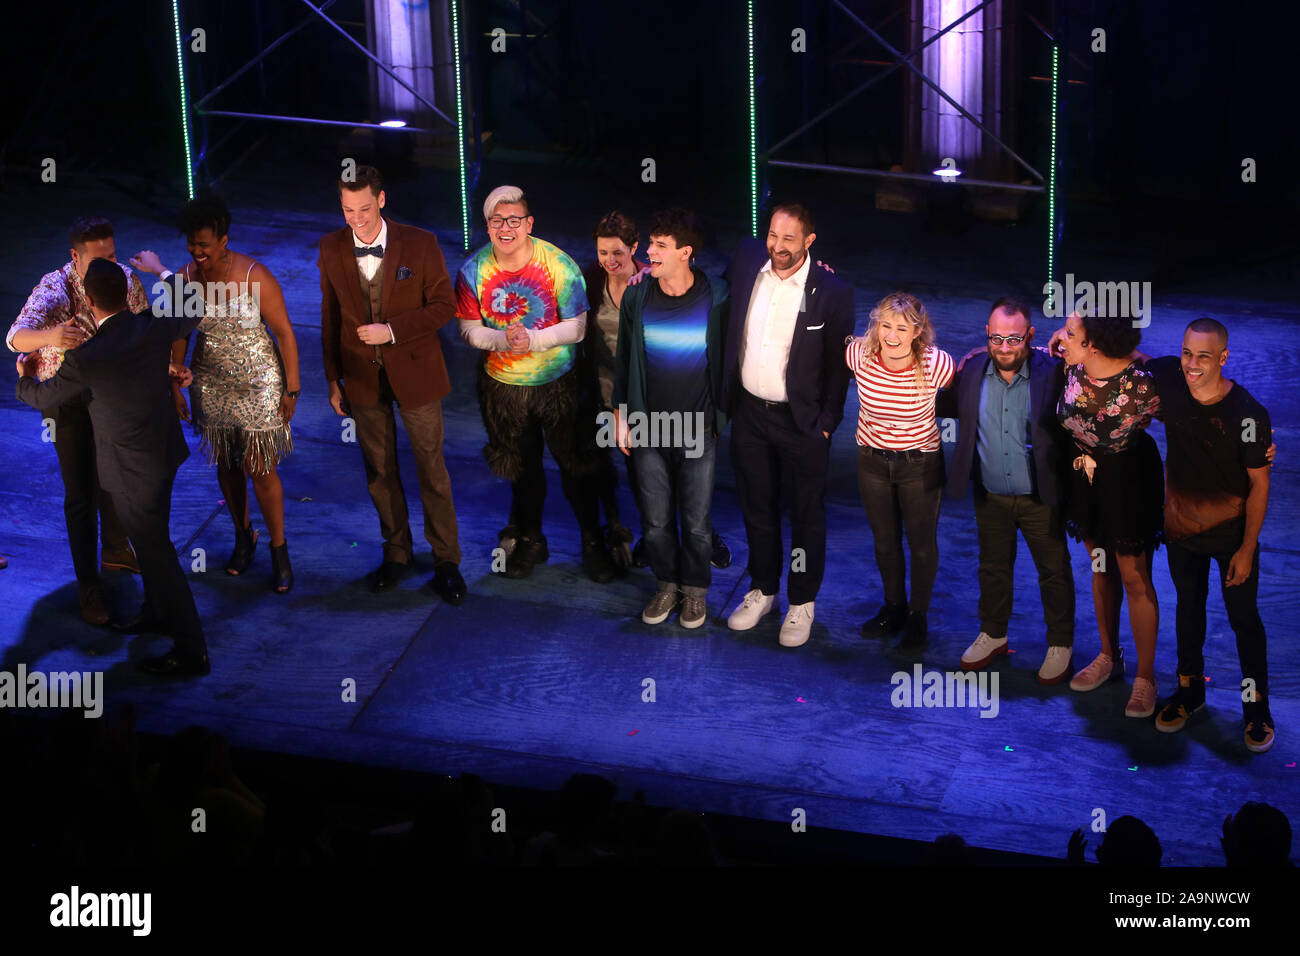 Opening Night For The Lightning Thief The Percy Jackson Musical At The Longacre Theatre Curtain Call Featuring Cast Creative Team Where New York New York United States When 17 Oct 2019